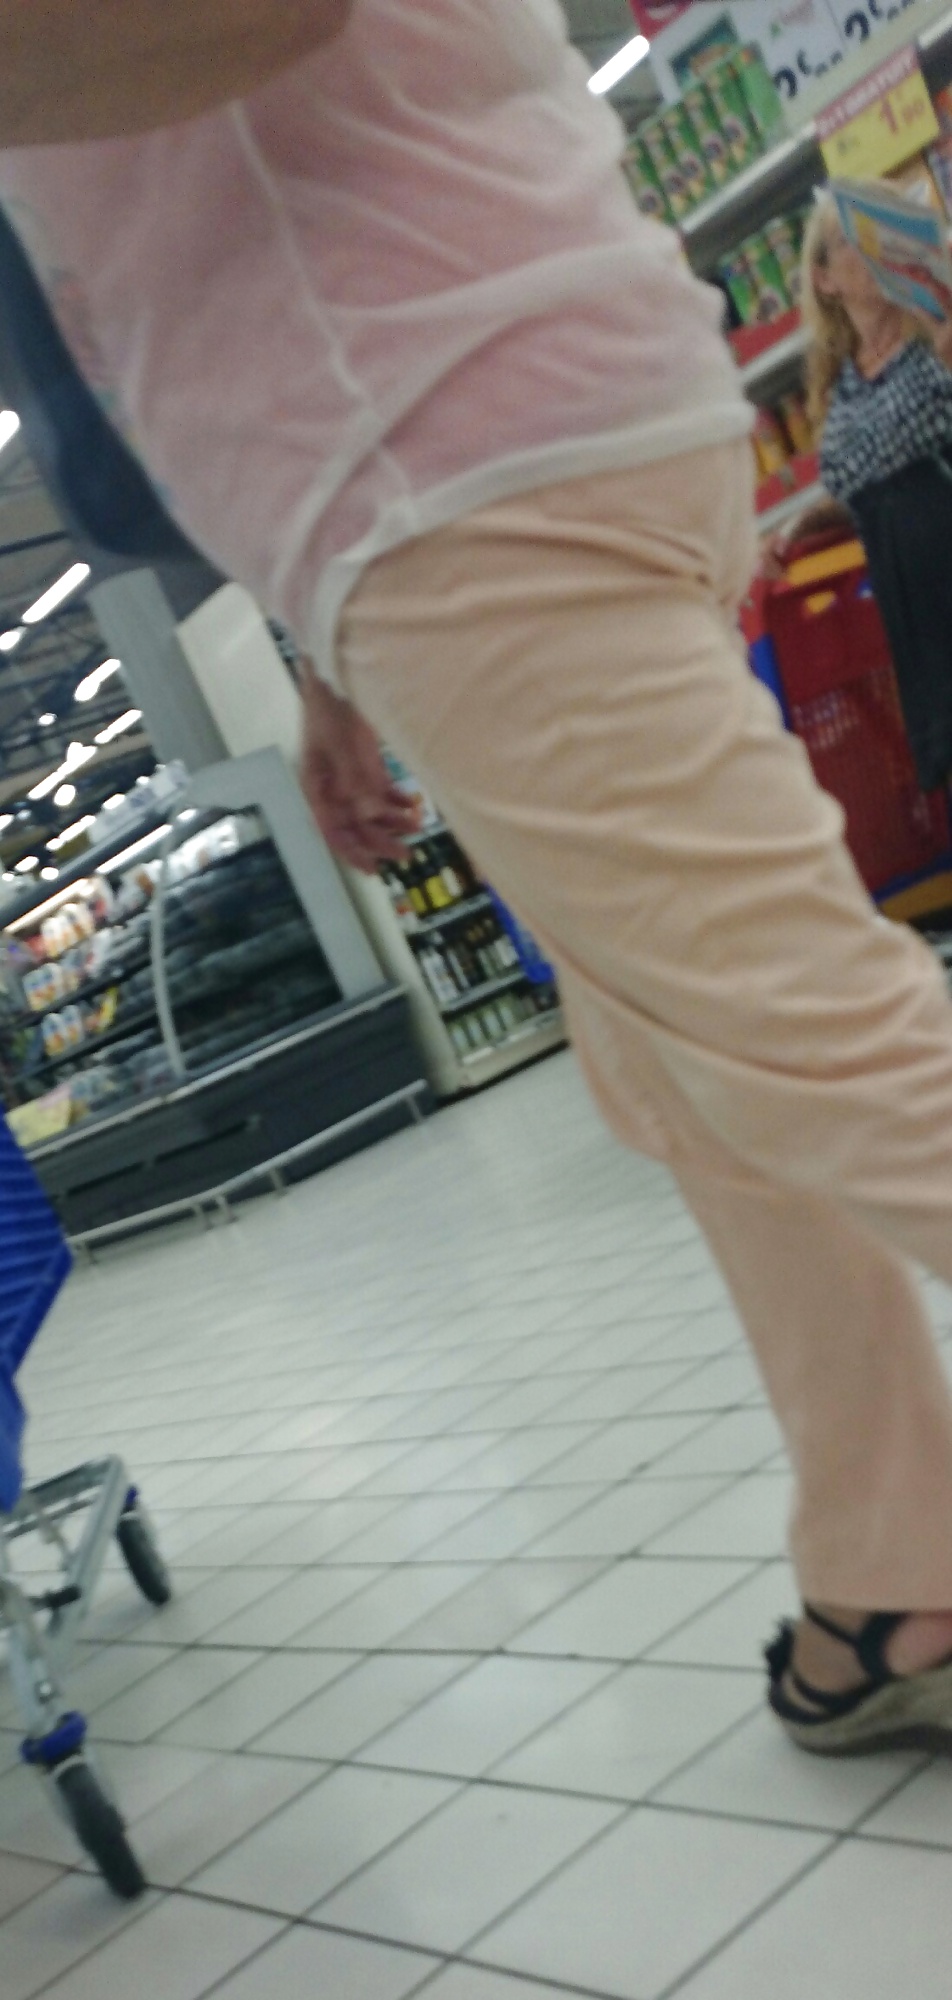 Candid heels feet and legs in supermarket #32752986